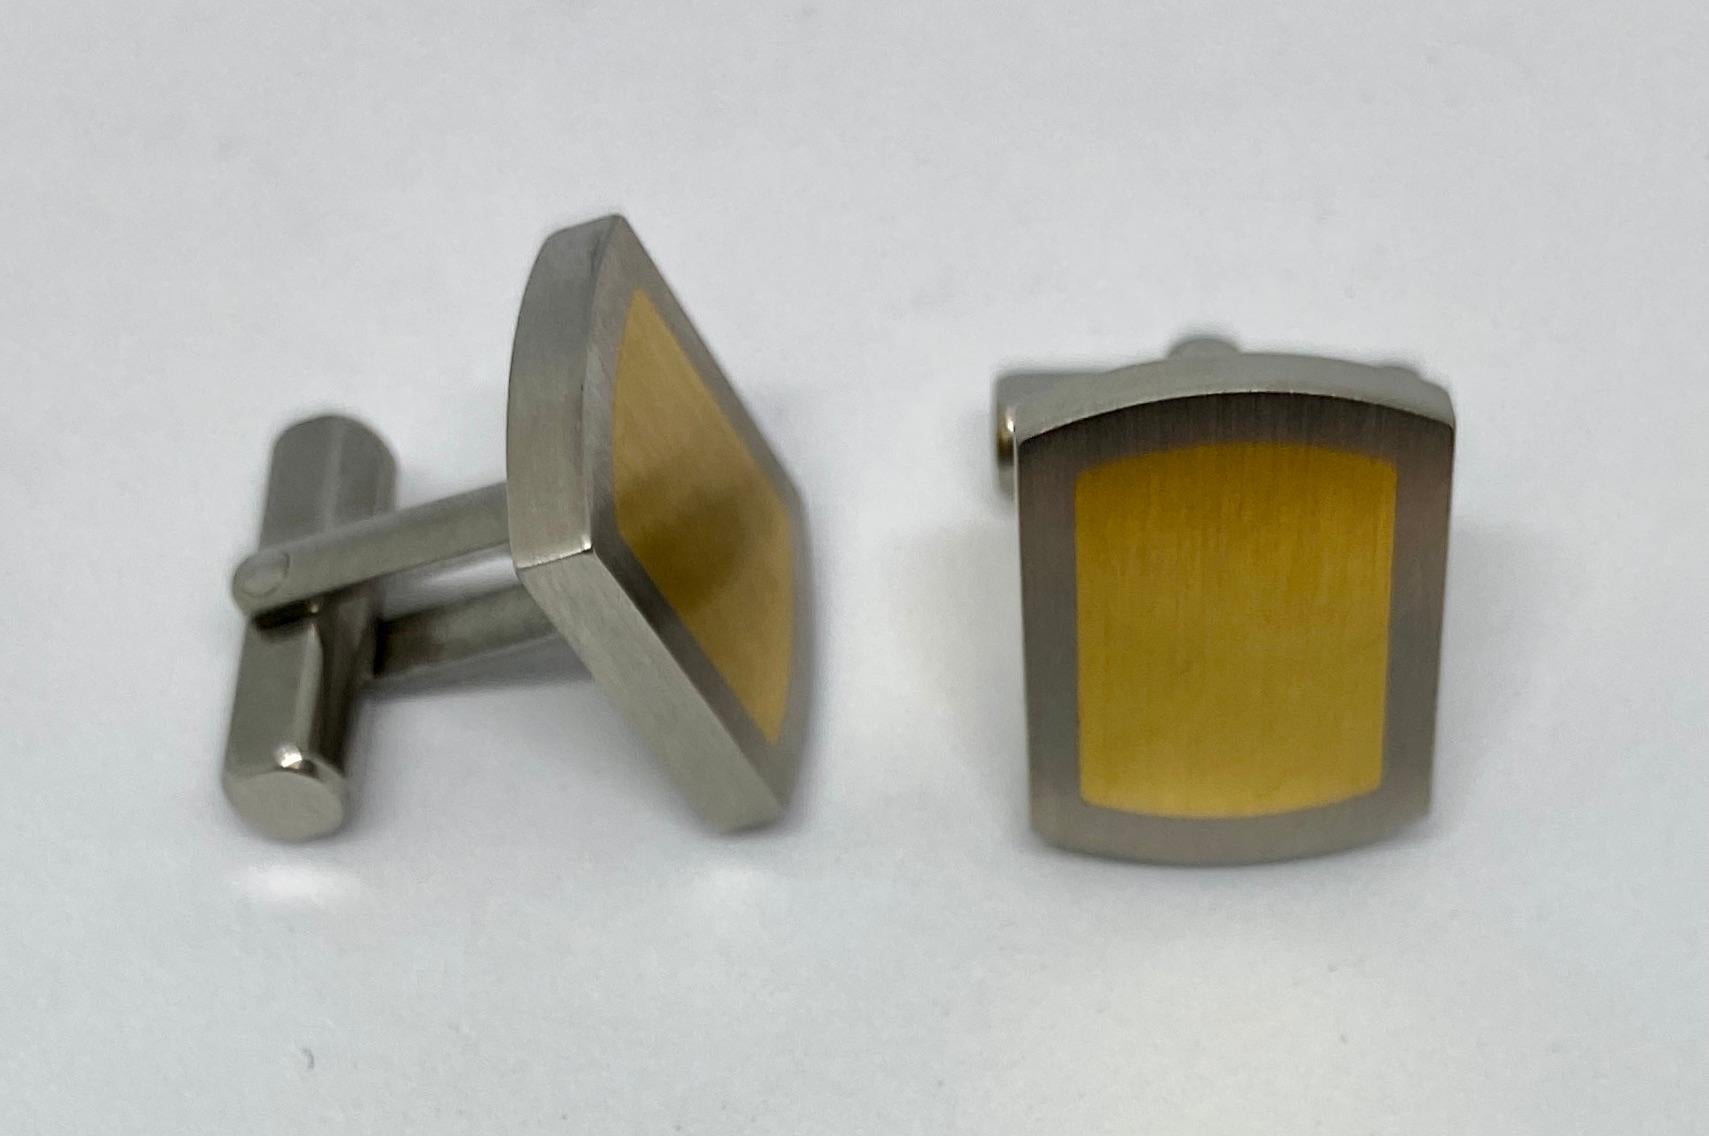 These contemporary cufflinks, designed and produced by TeNo in Pforzheim, Germany, are made of the highest quality, nickel-free stainless steel inset with 18K yellow gold.

They feature toggle backs, making them easy to insert and remove from the